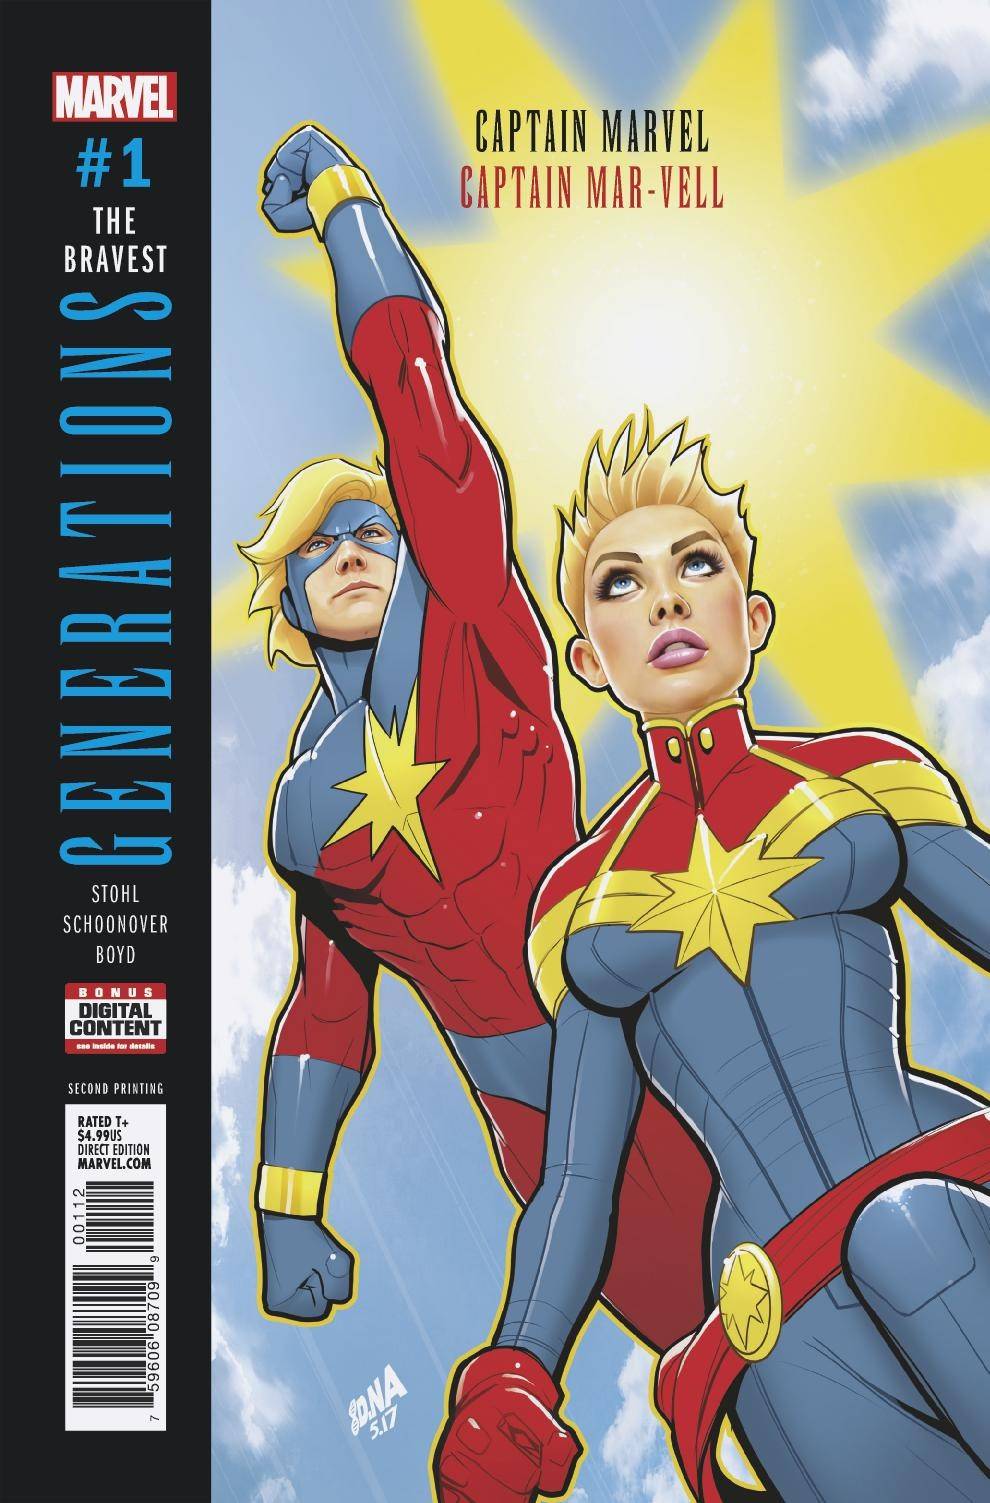 GENERATIONS: CAPTAIN MARVEL AND CAPTAIN MAR-VELL#1